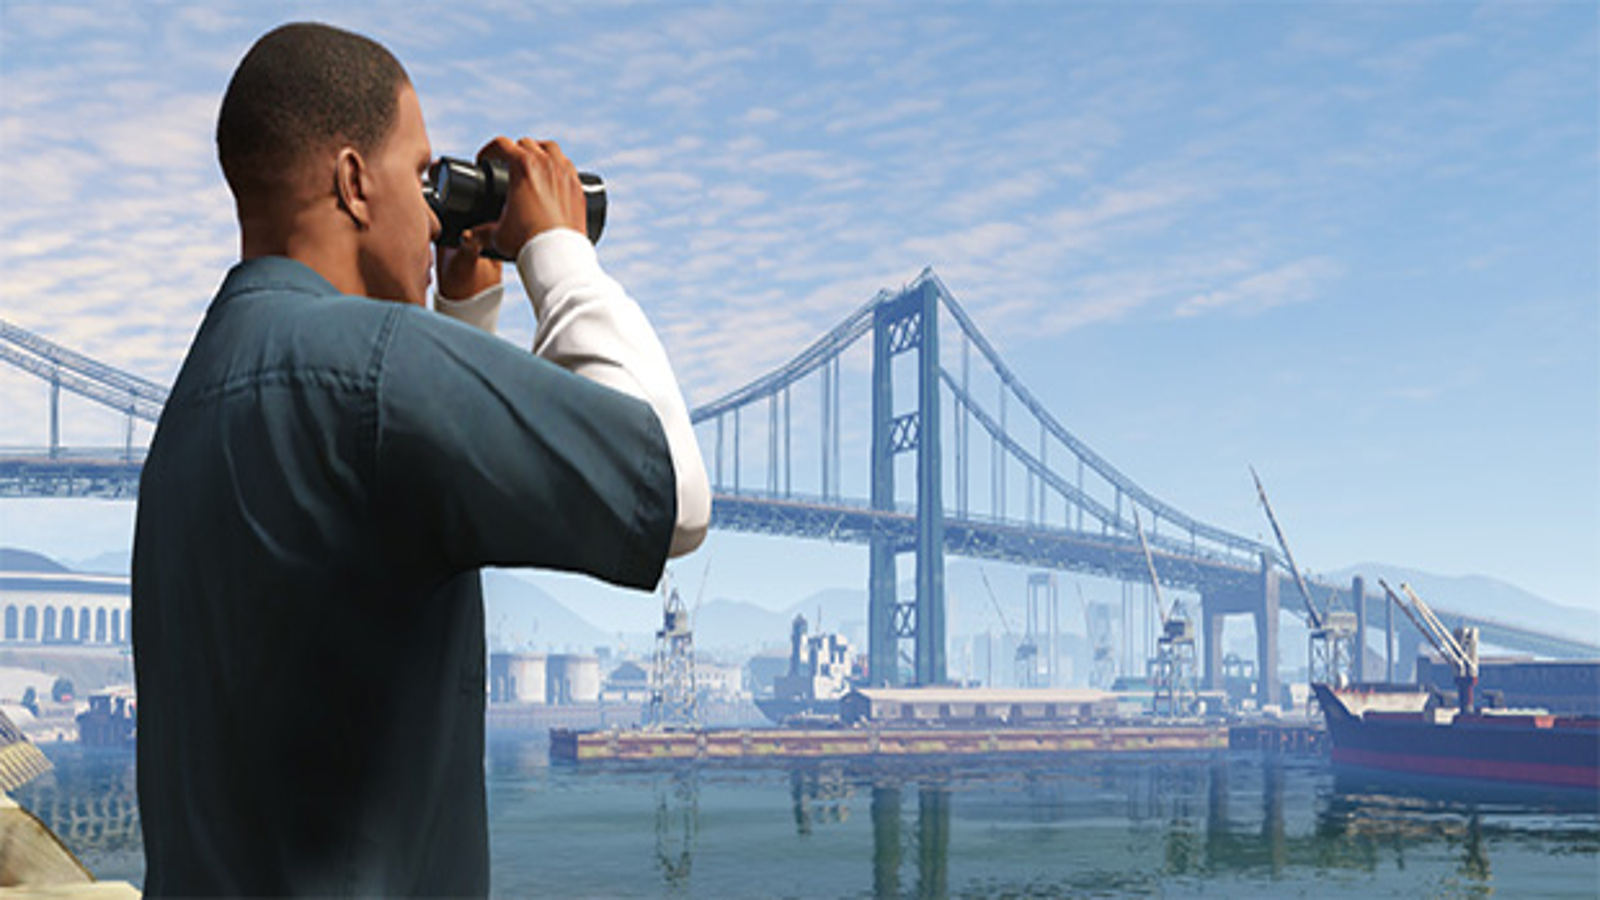 GTA 5 PC release date delayed and system specifications announced